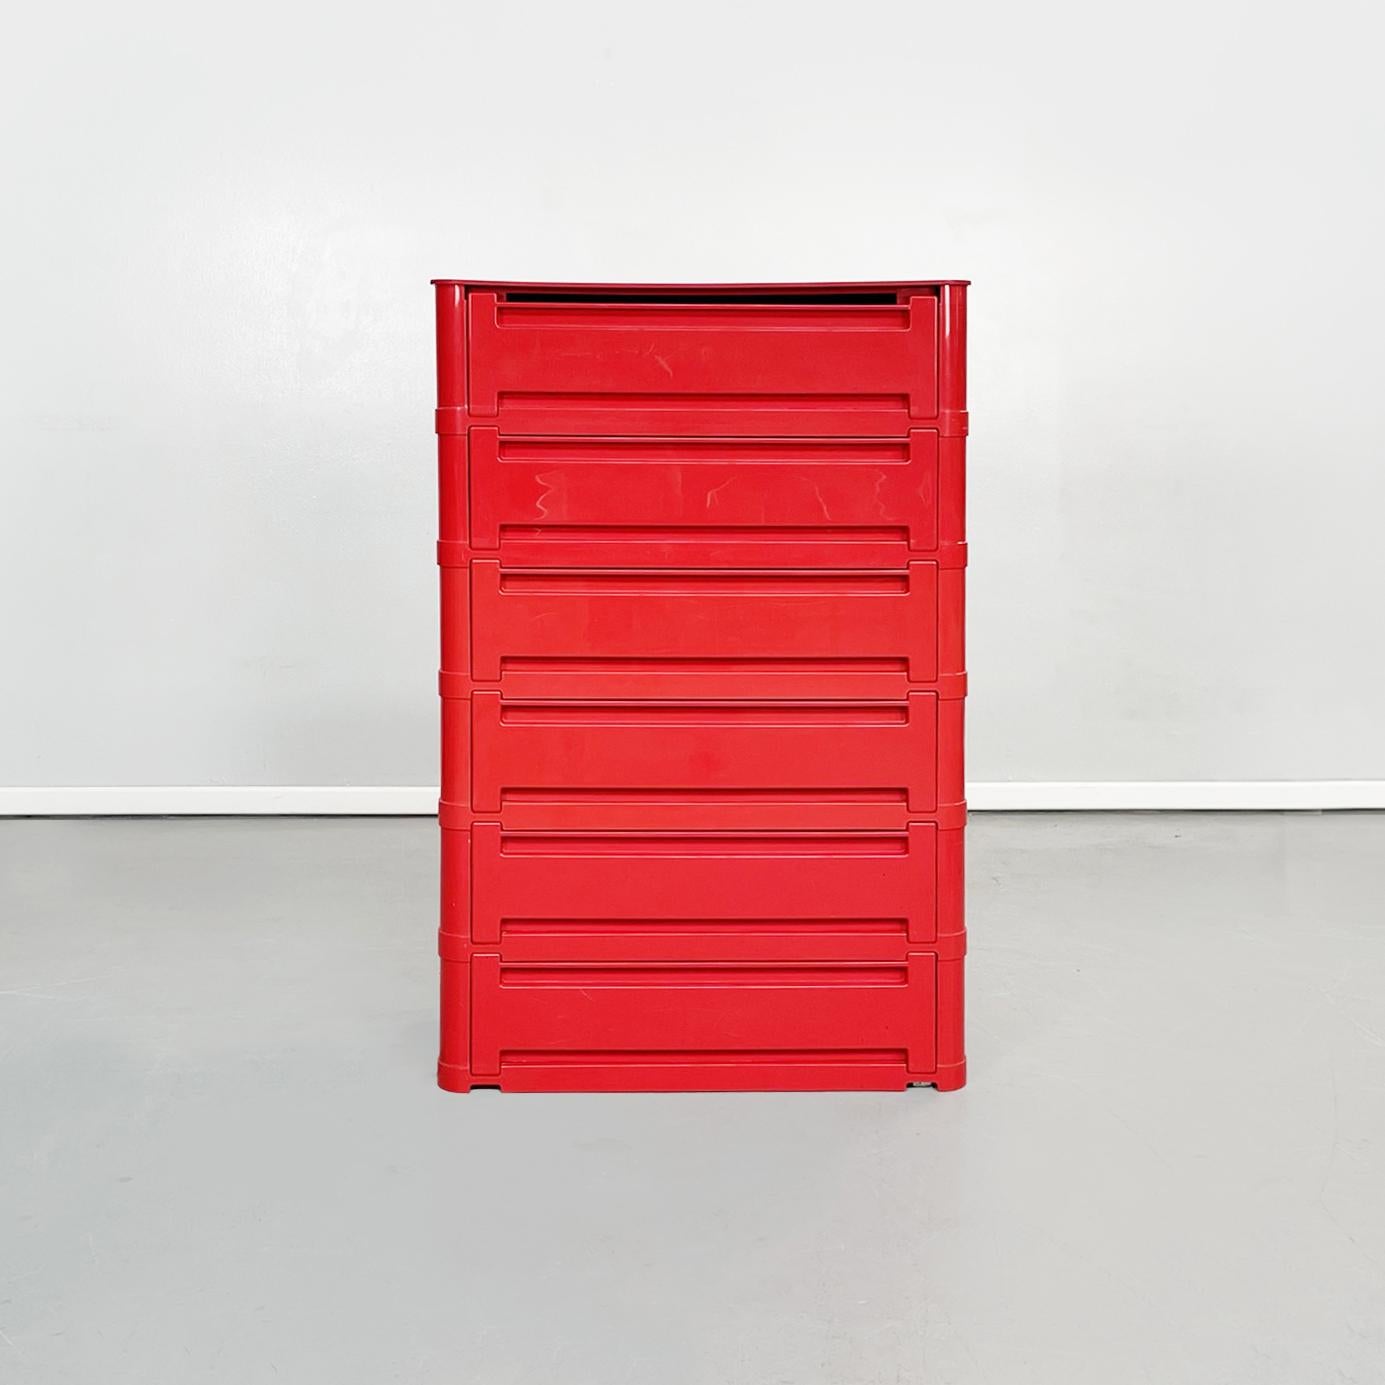 Italian space age Modular chest of drawers by Olaf Von Bohr for Kartell, 1970s
Modular chest of drawers with rectangular base with rounded corners, in bright red plastic. The six modules, that compose it, have drawers with flap opening. Can also be